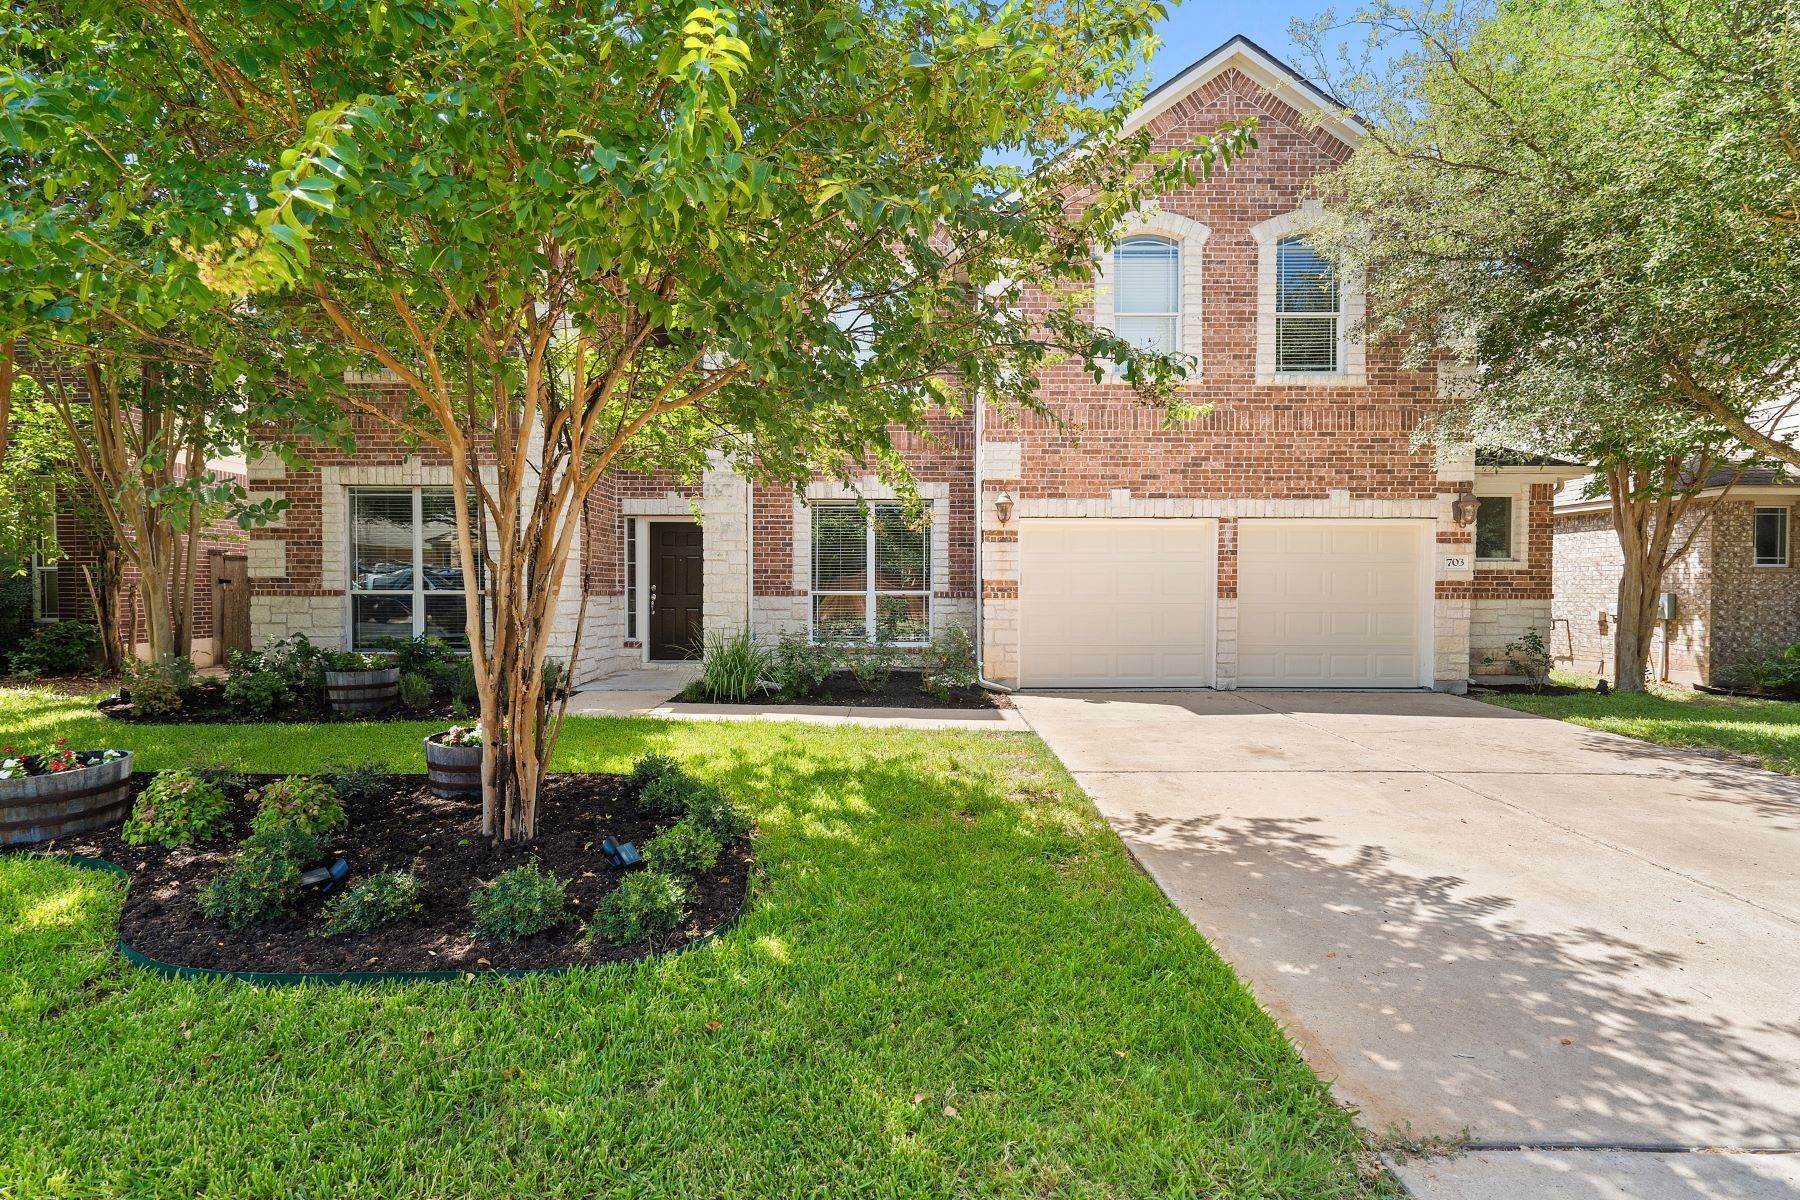 Single Family Homes for Sale at Teravista Golf Course Community 703 Crestwood Lane Round Rock, Texas 78665 United States